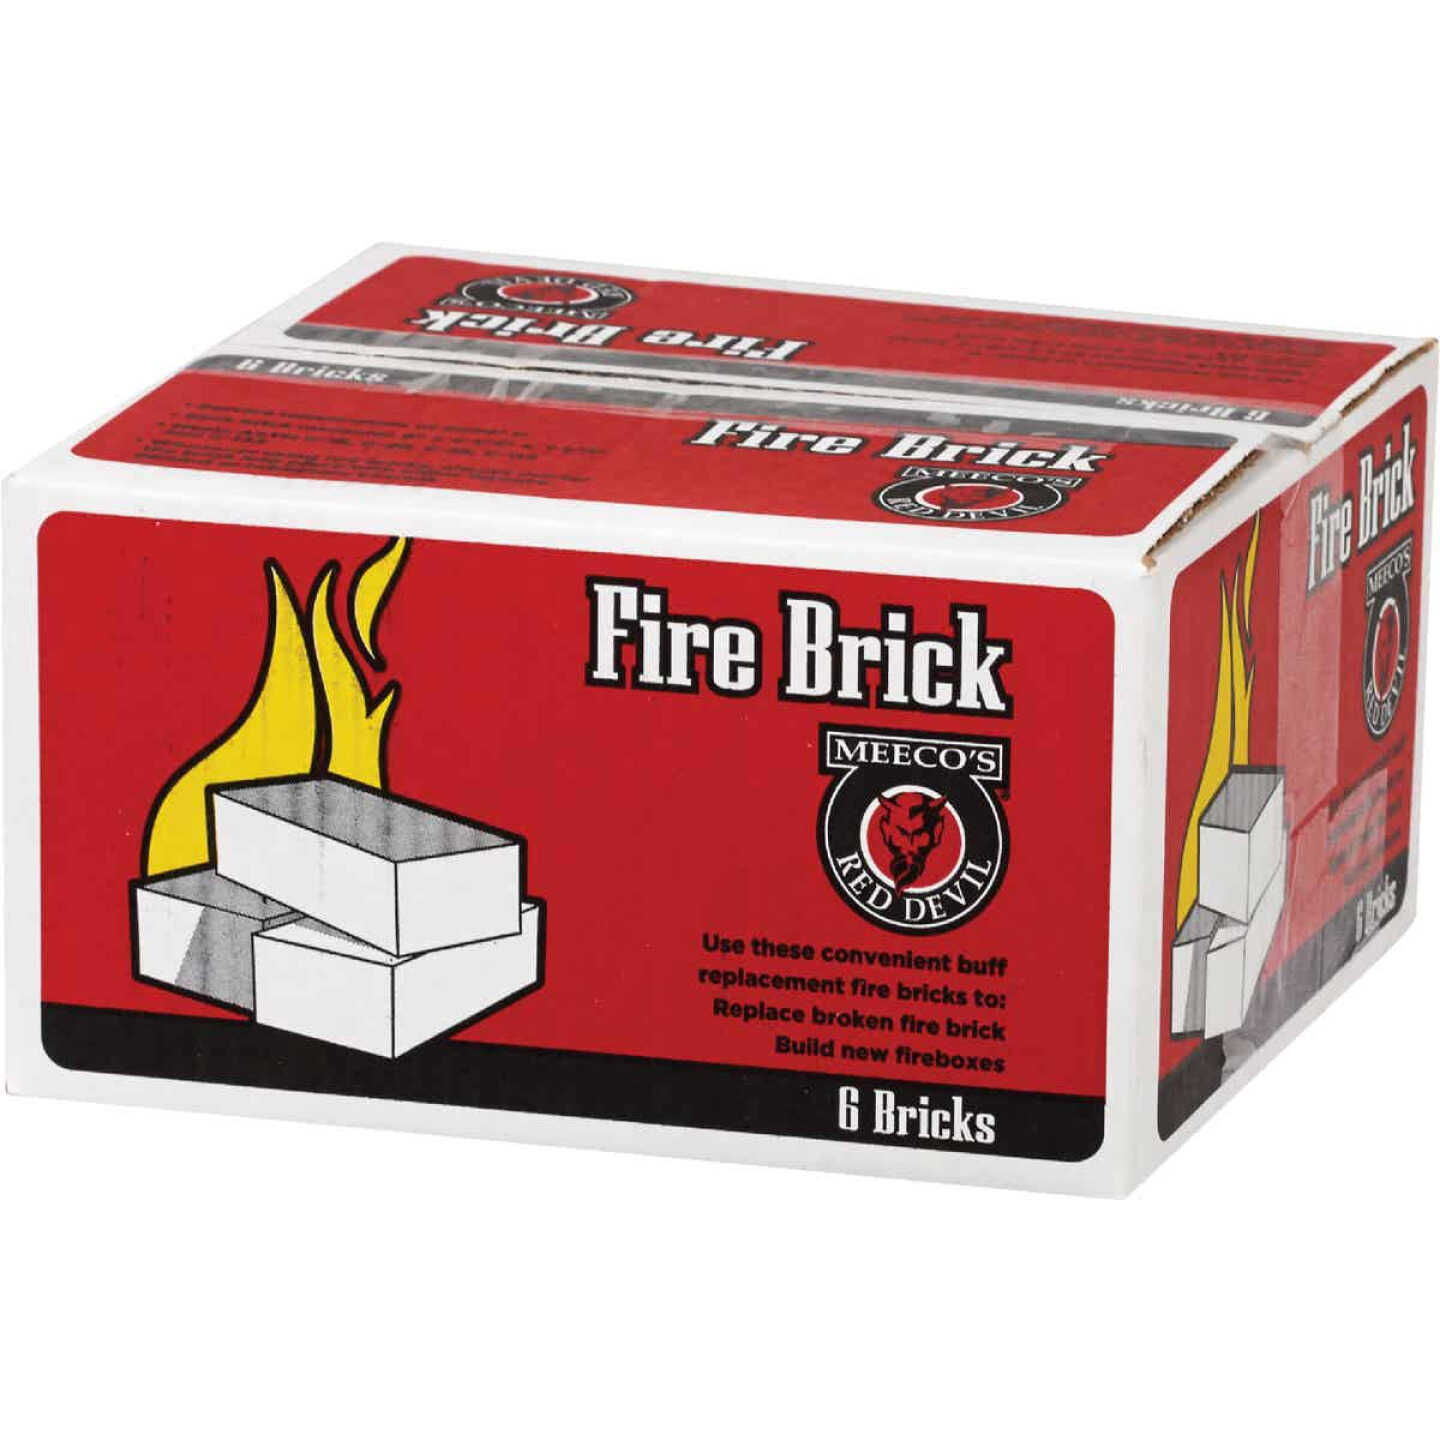 Meeco's Red Devil ASTM 9 In. 4-1/2 In. Fire Brick (6-Pack